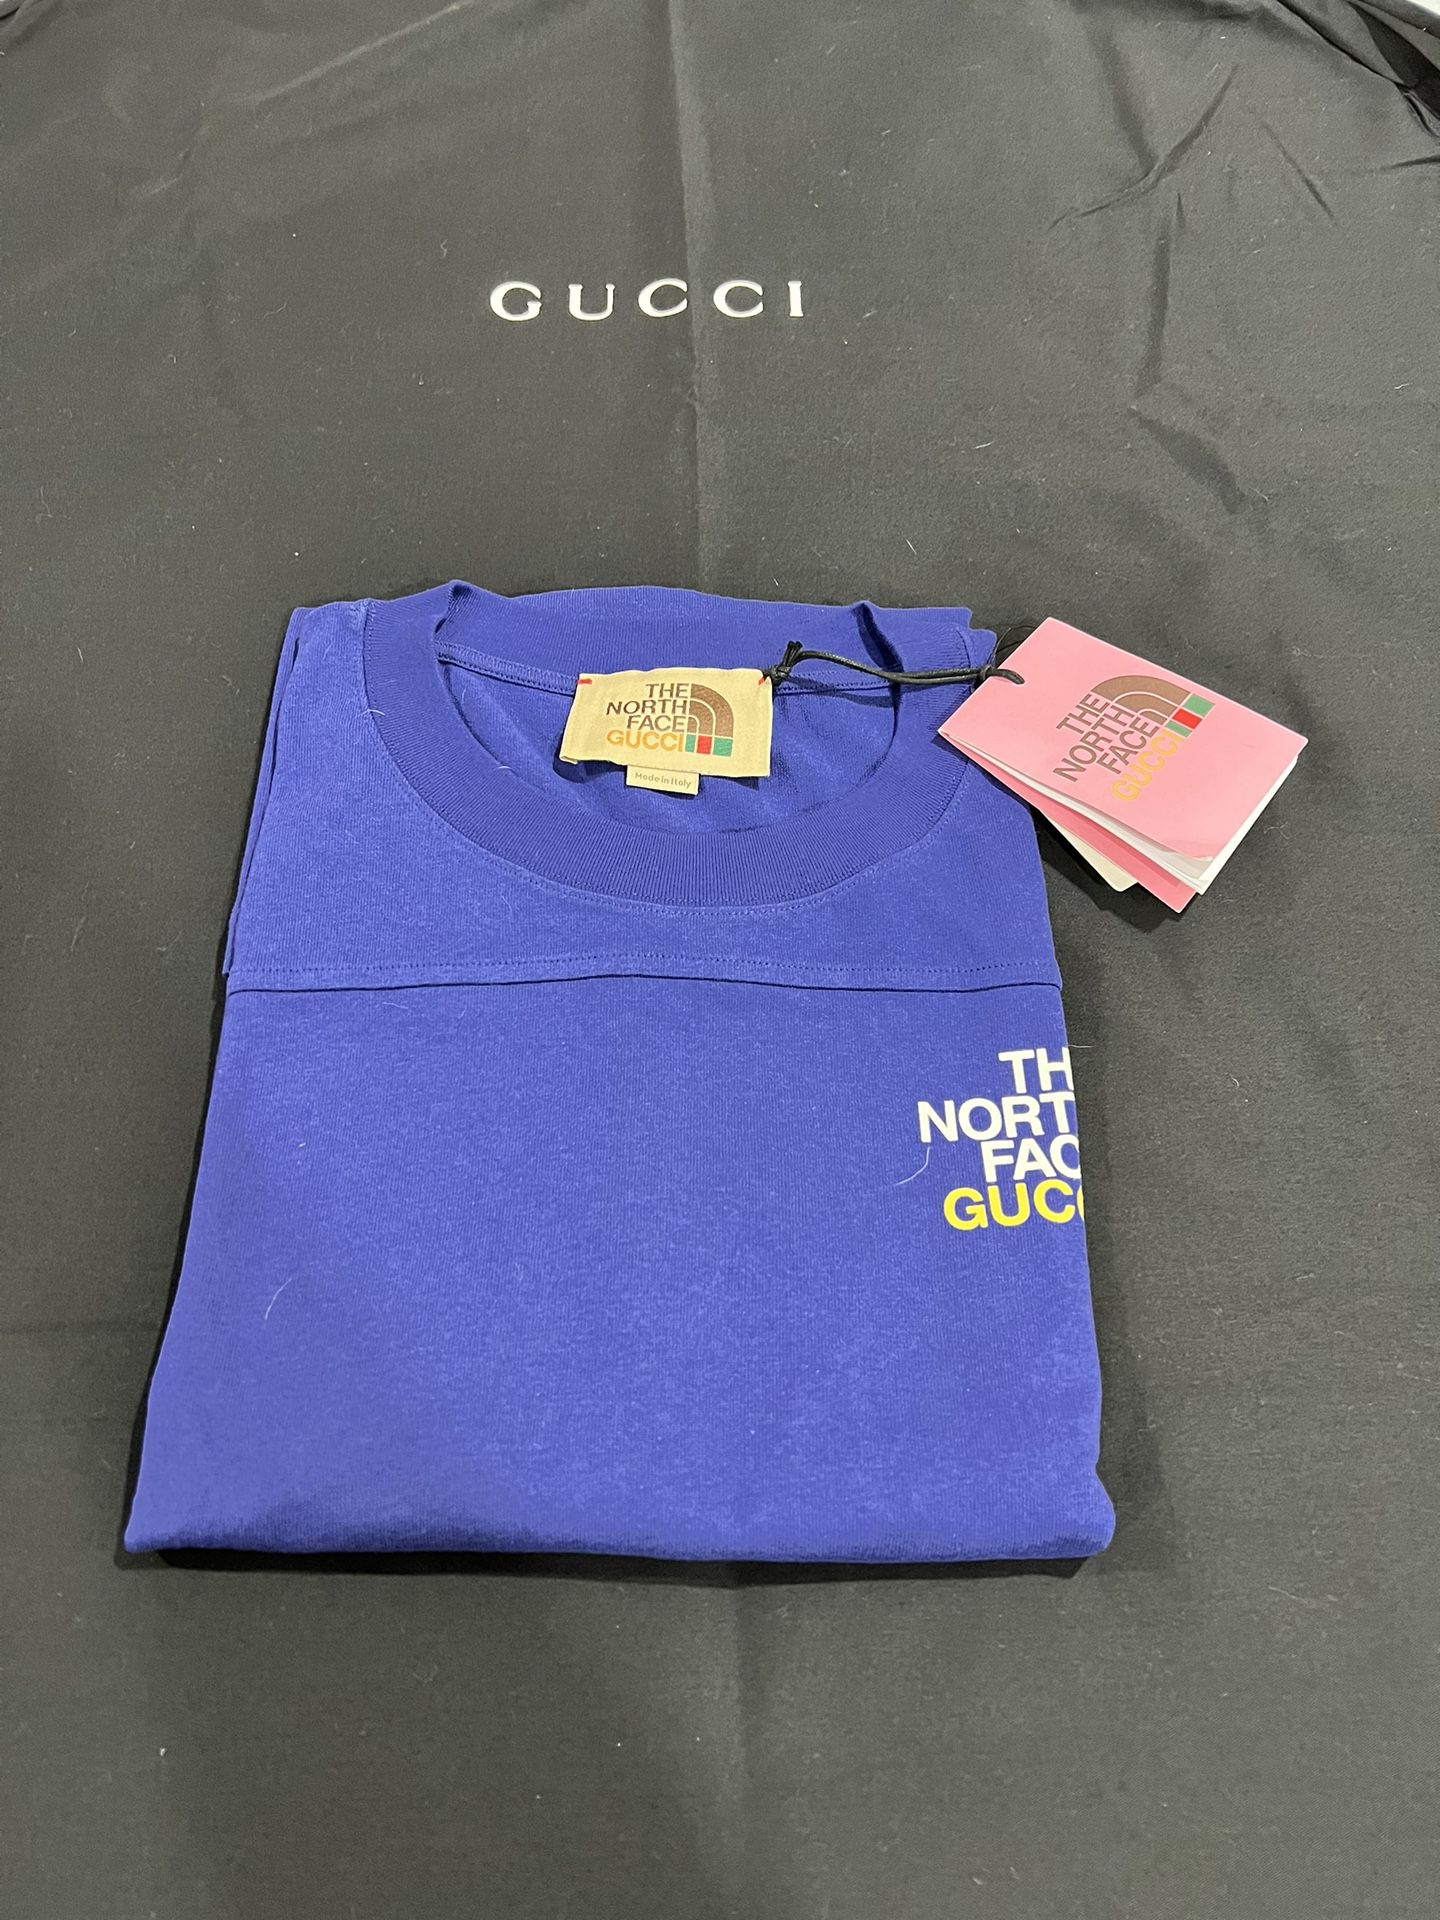 NEW Authentic GUCCI x The North Face Blue Logo T-Shirt Mens Size XL $399